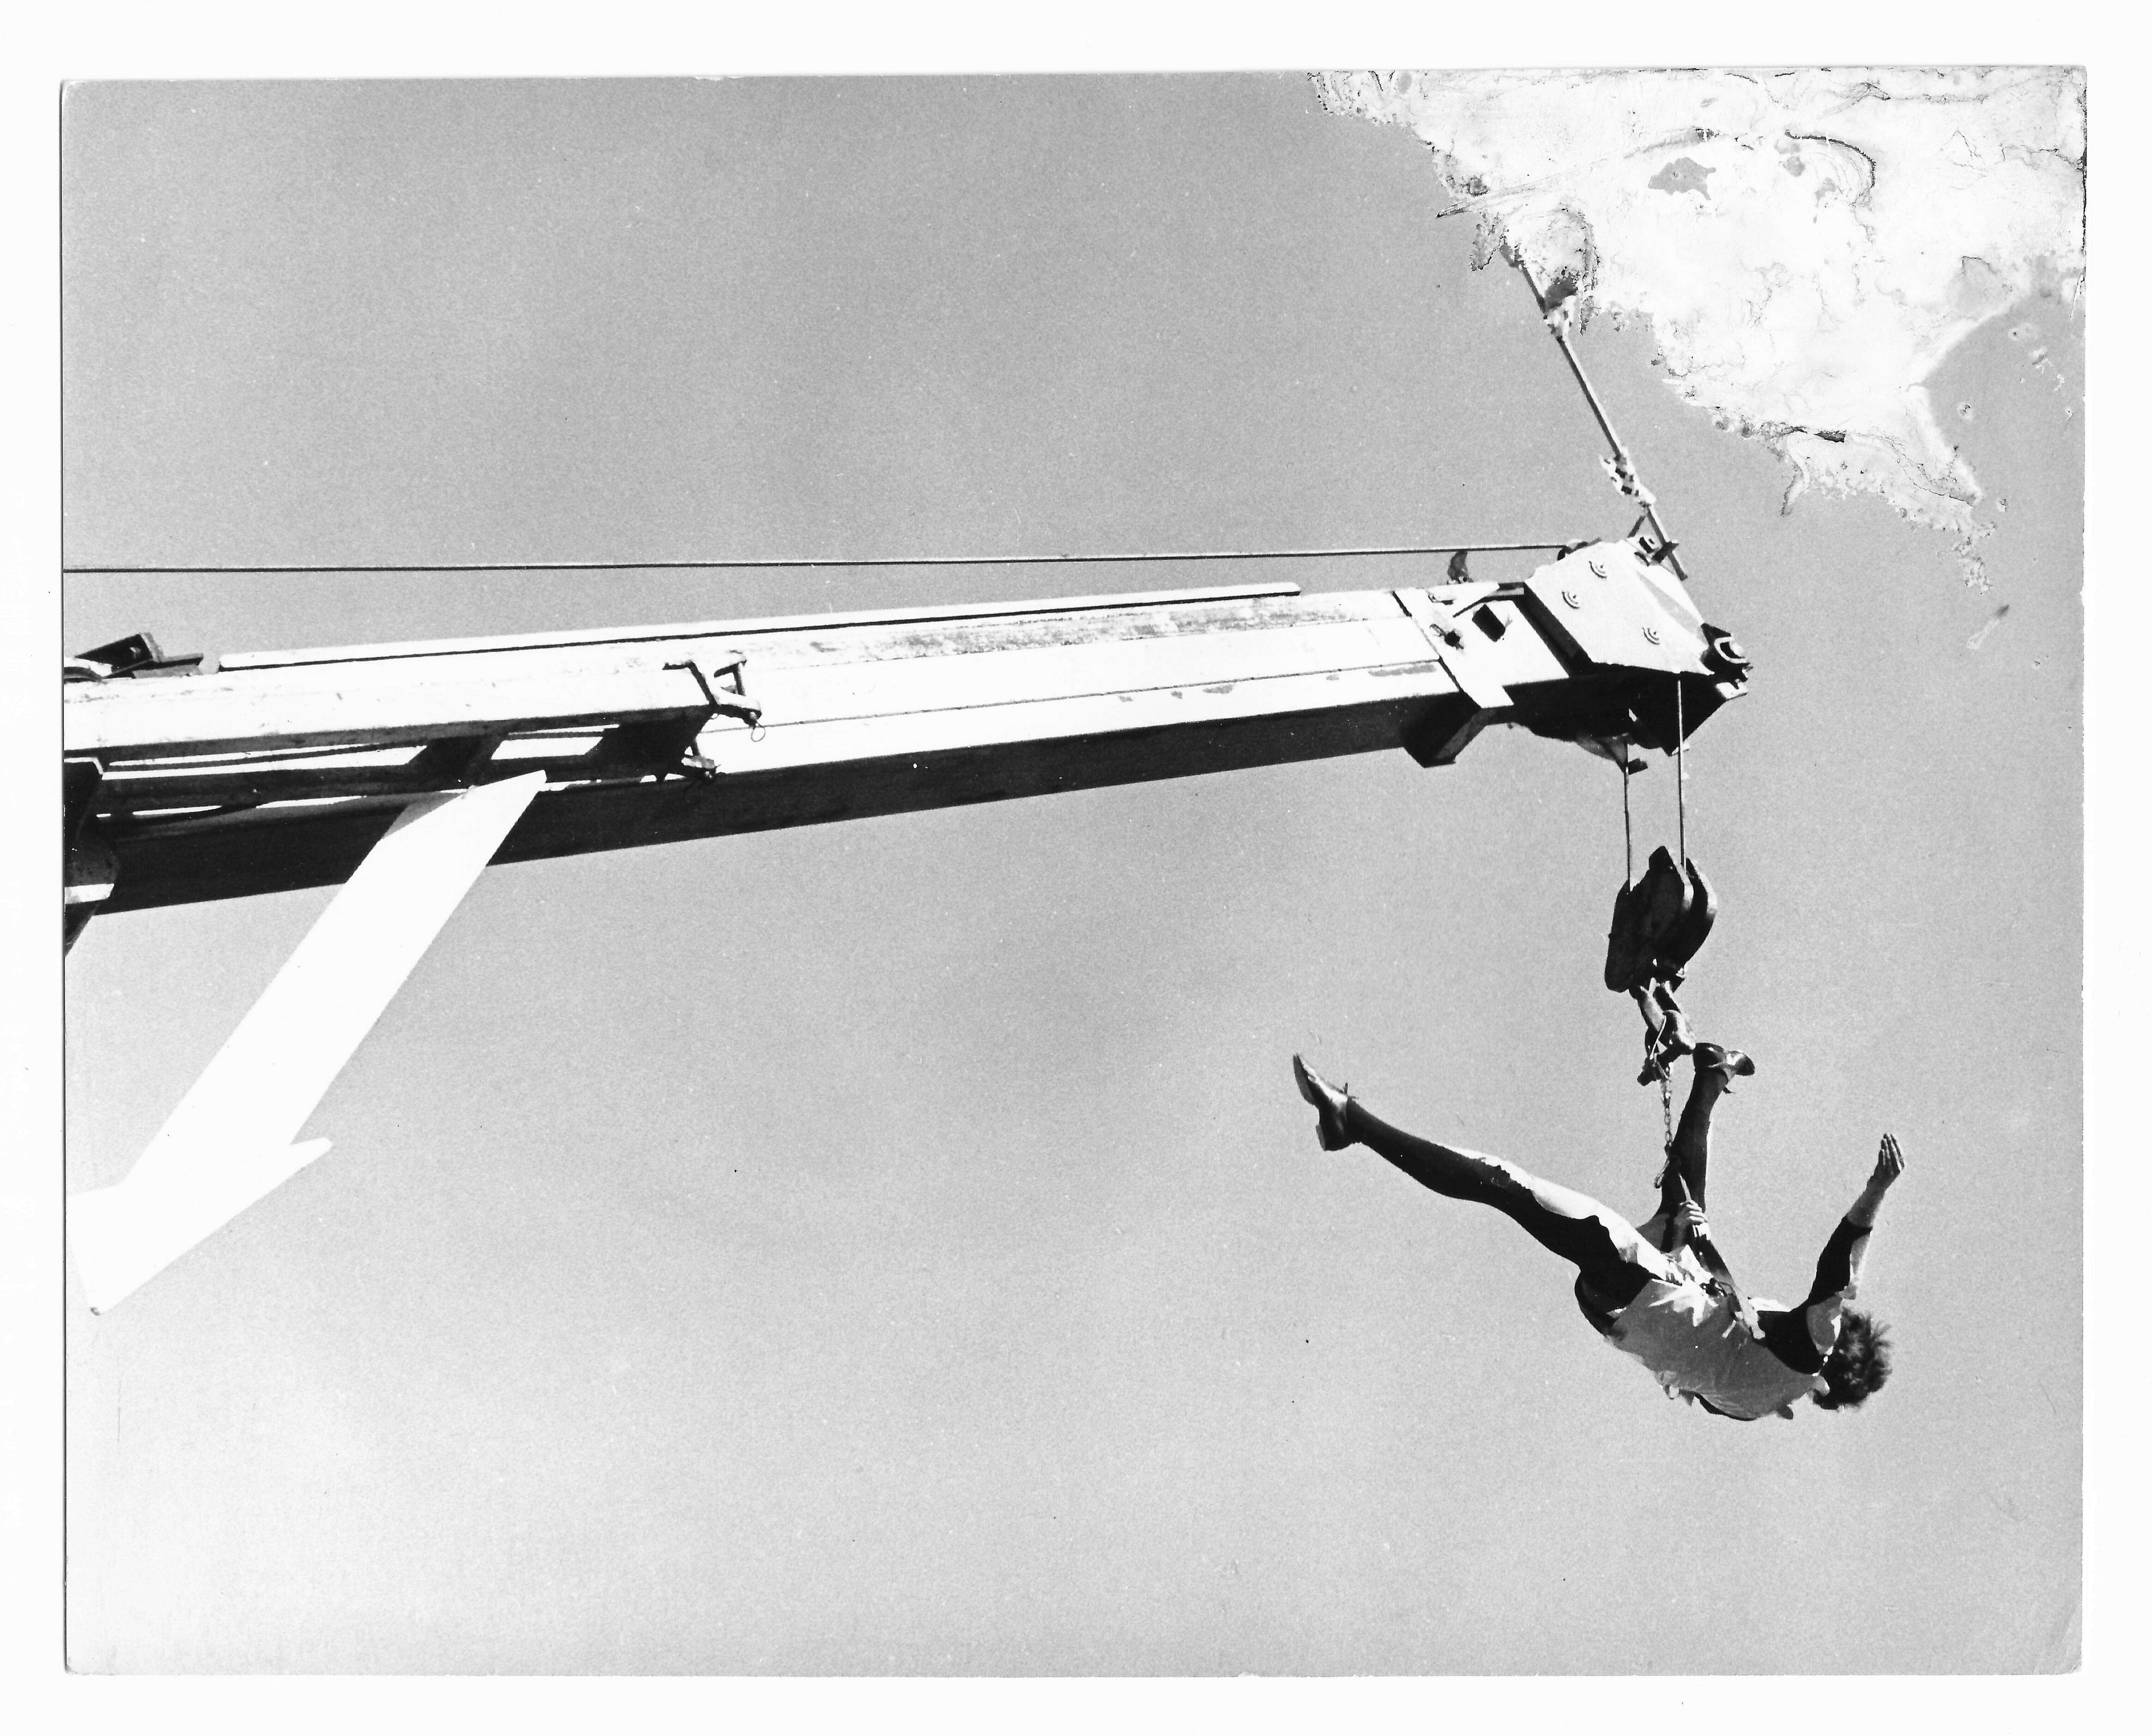 The image shows a black-and-white photograph taken during the performance or rehearsal of Leopoldo Maler’s Crane Ballet. The image, shot from below, shows a mechanical crane arm extending vertically from the bottom of the frame to near its top. At the end of the arm, a performer is attached to the crane by a harness and is captured midmotion, his arms and legs extended outward in an acrobatic leap. Lower on the crane’s arm, a large white arrow, pointing diagonally downward, is affixed. The top left corner of the photograph appears damaged or corroded.